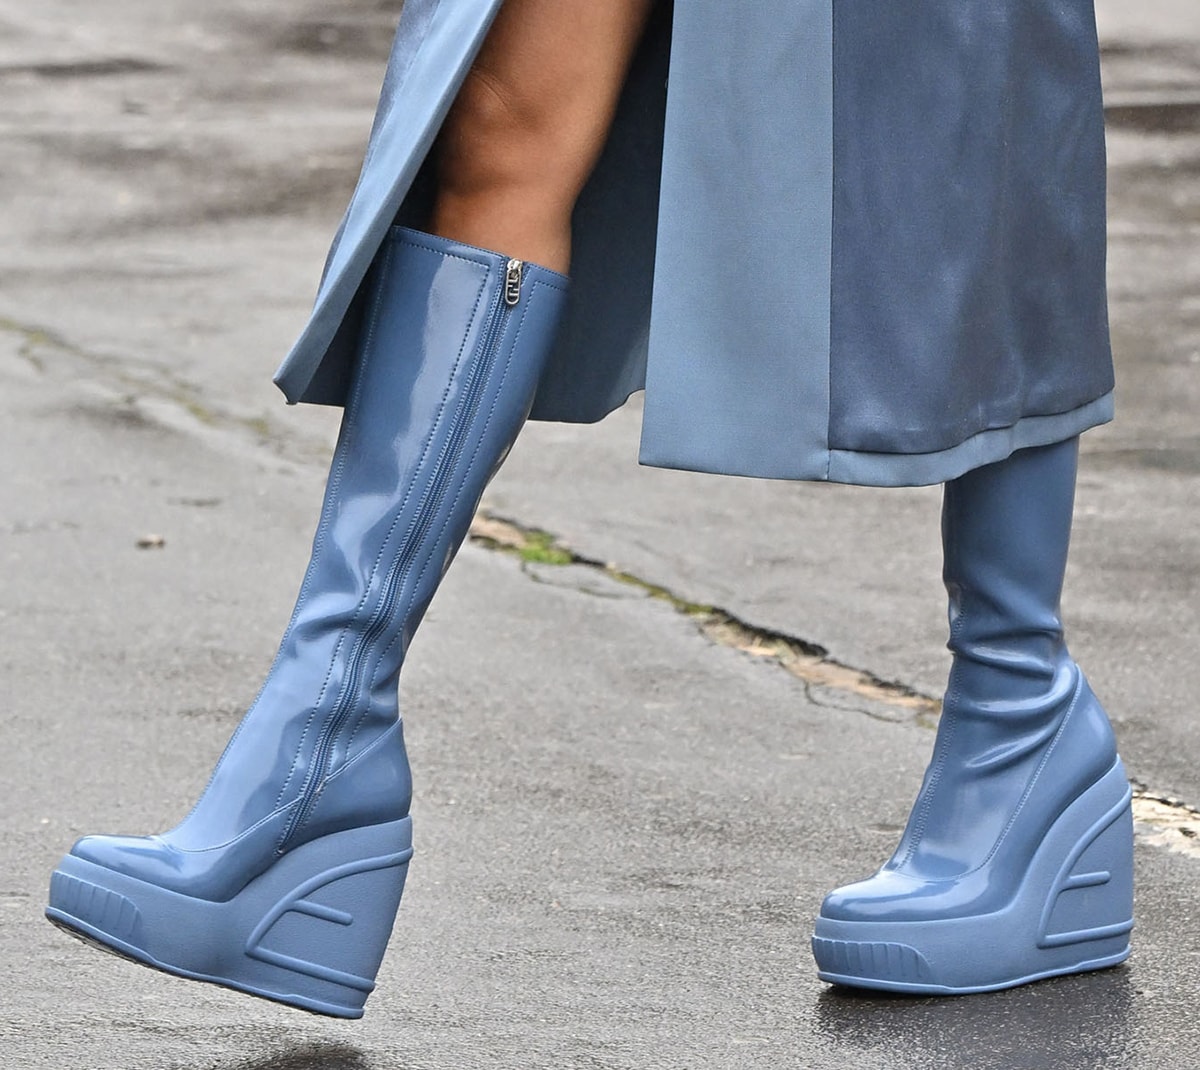 Rita Ora's Fendi boots are made of patent leather and feature thick rubber platforms and wedge heels